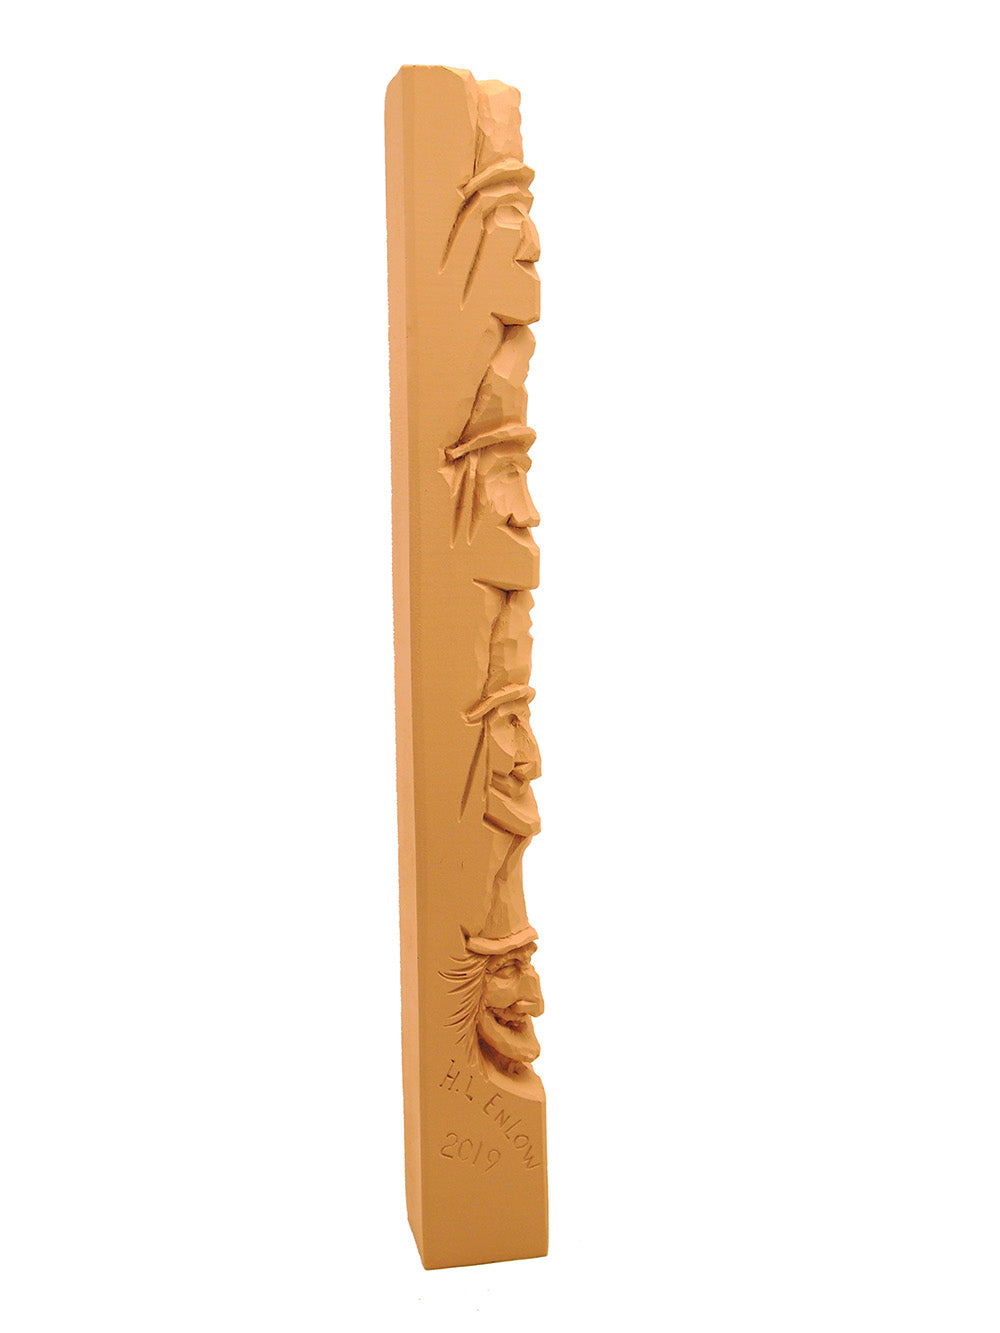 Witch Study Stick Kit (Learn to Carve Faces with Harold Enlow)